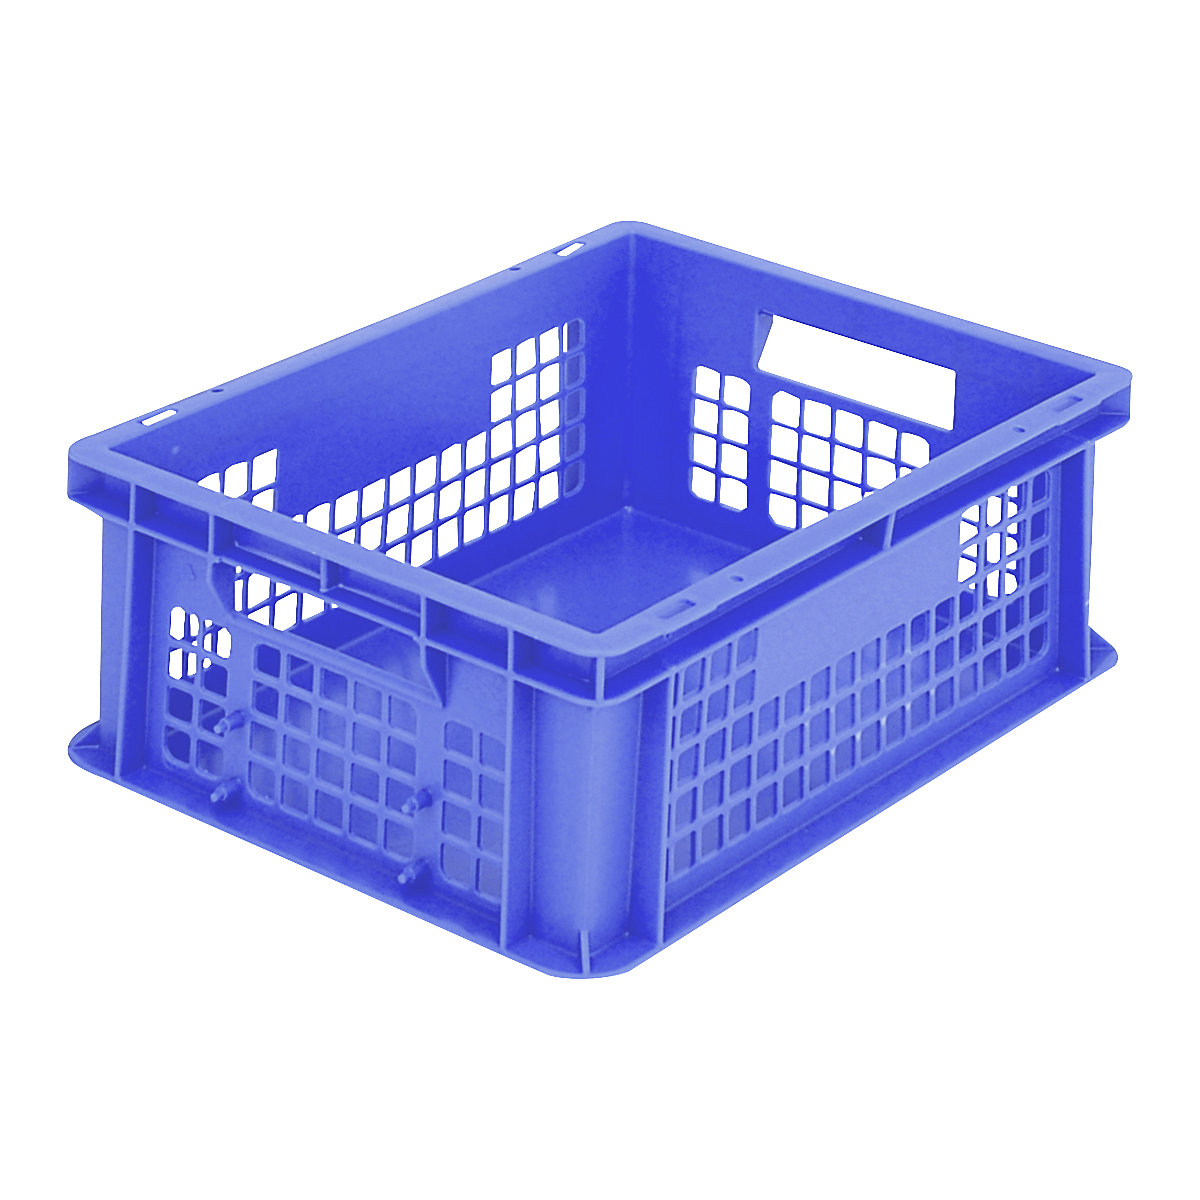 BN Euro stacking container - BITO